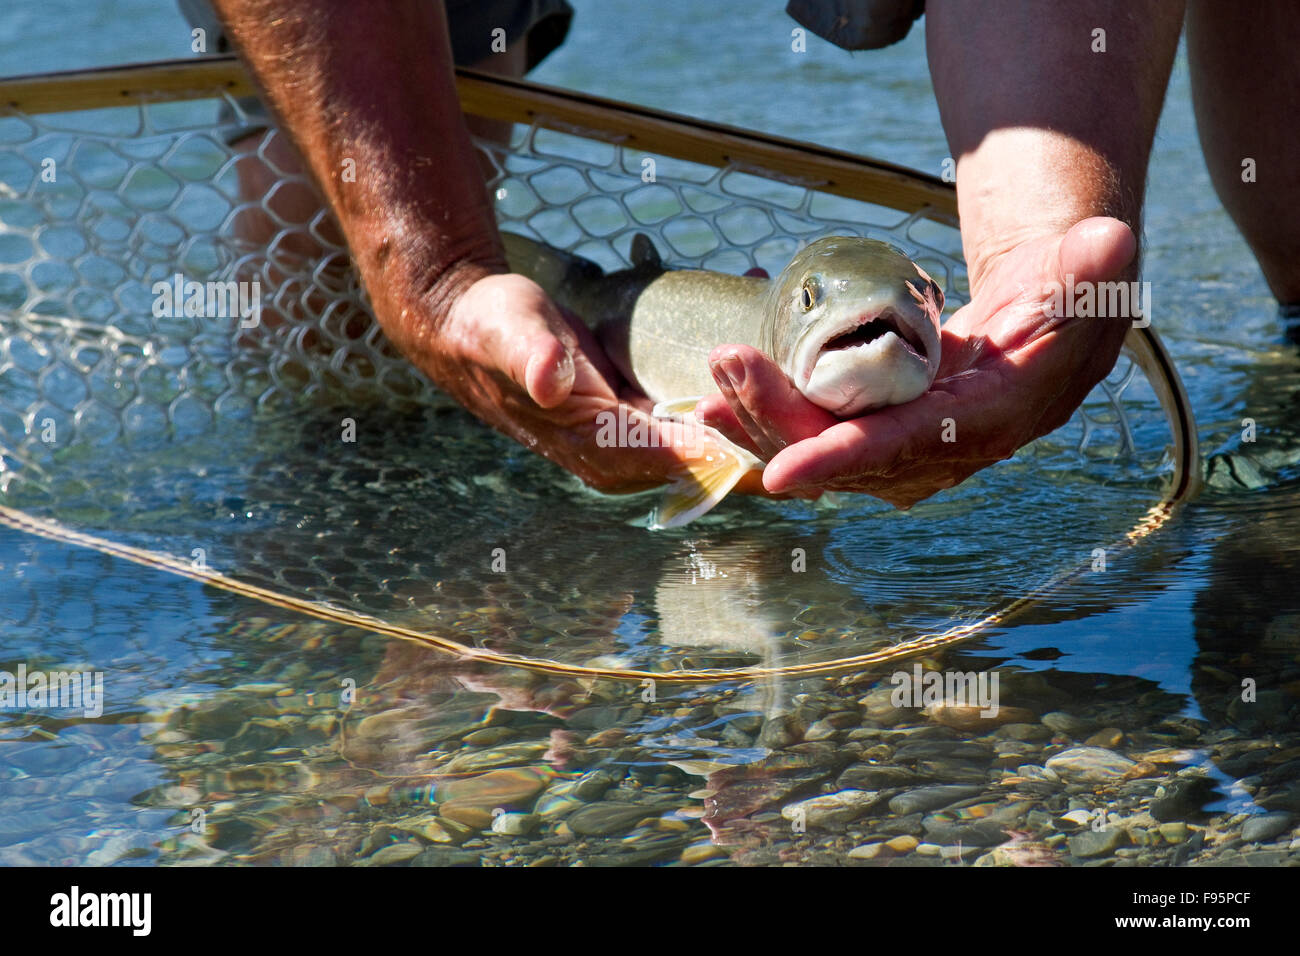 Middleaged man releases bull trout into Bull river, East Kootenays, BC, Canada Stock Photo